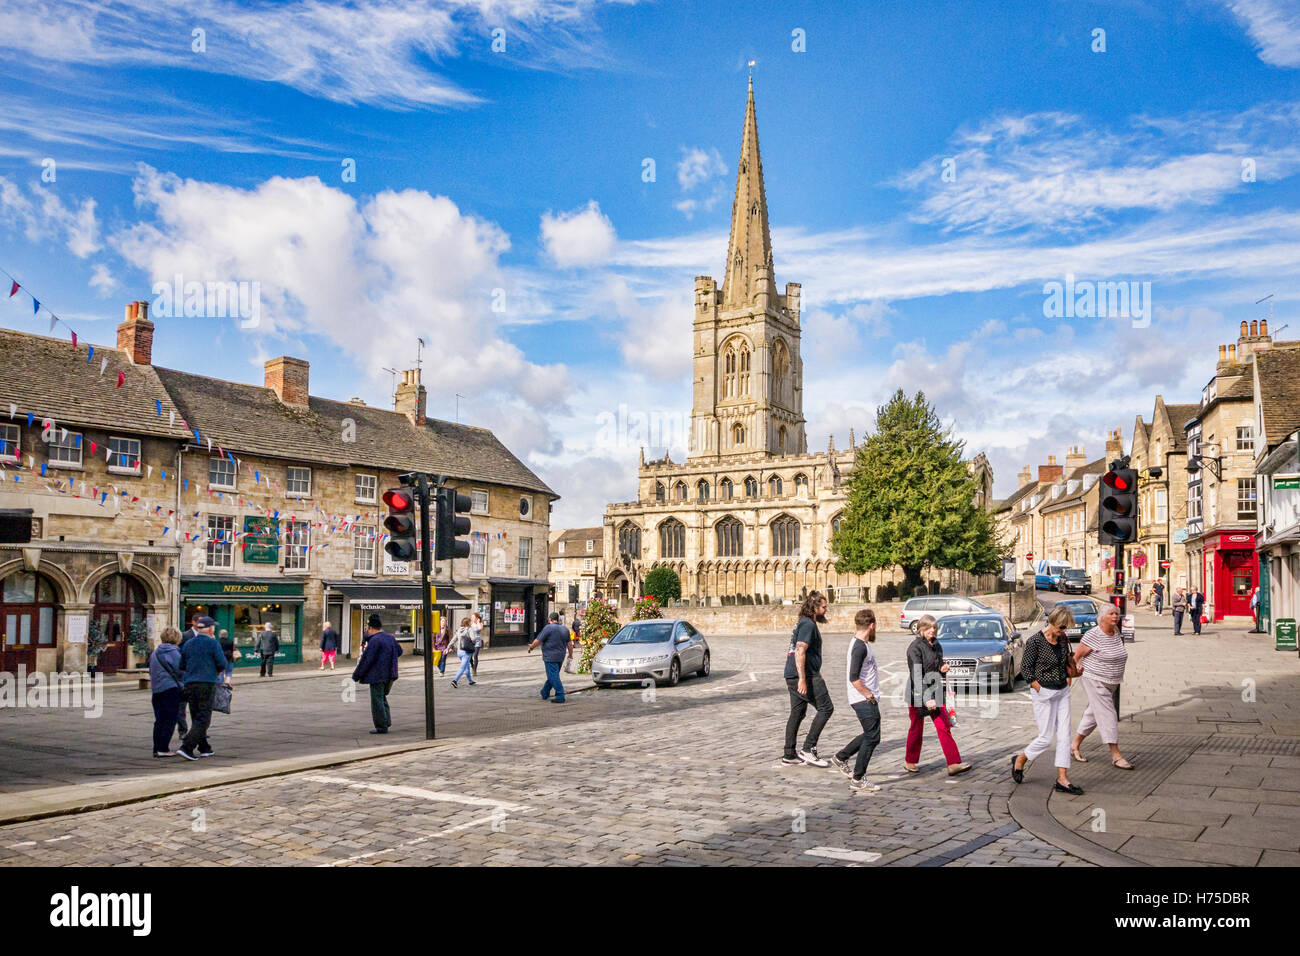 Red Lion Square, Stamford, Lincolnshire, Angleterre, RU Banque D'Images